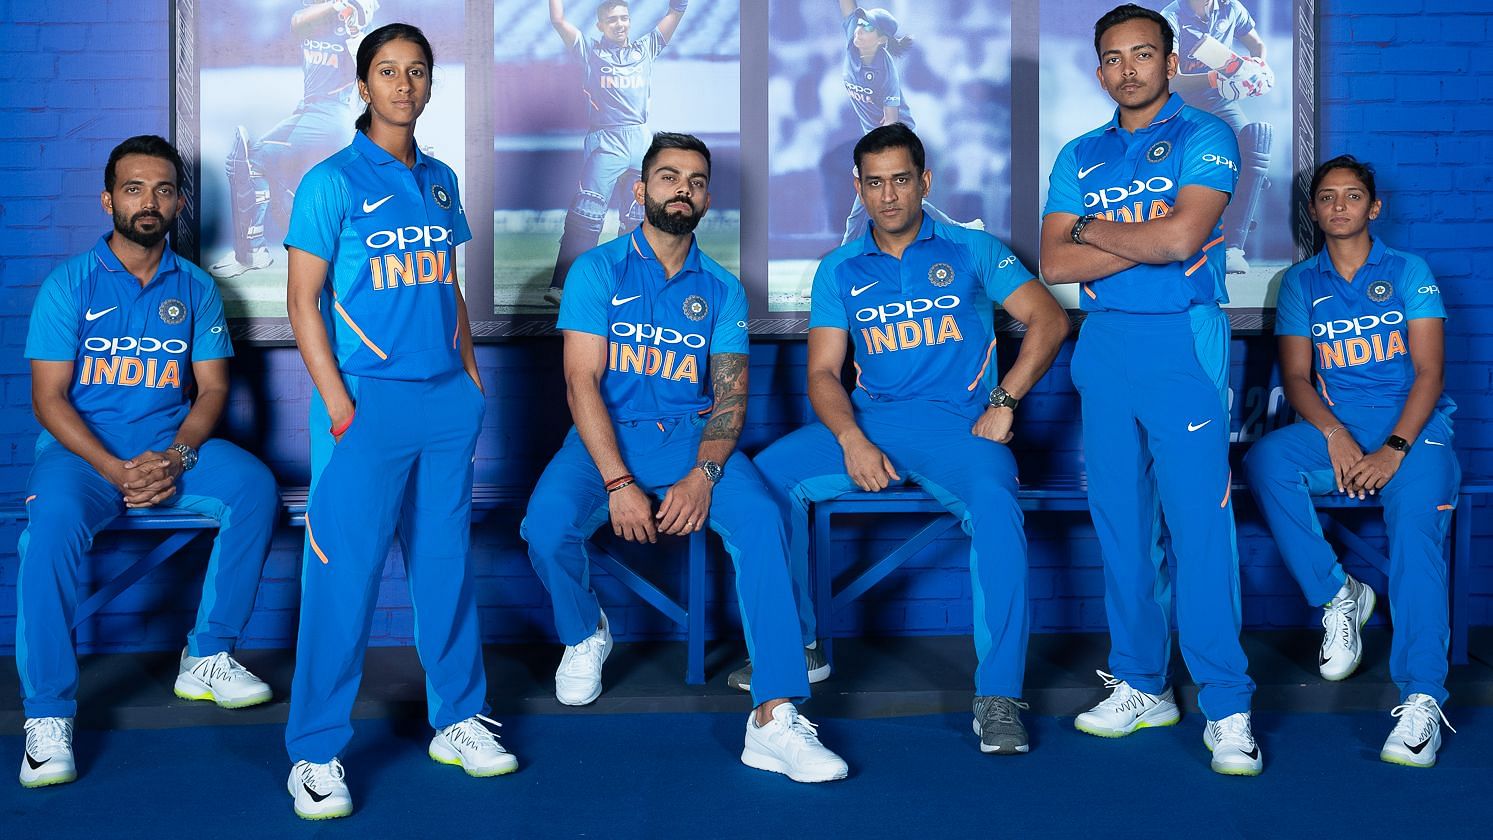 India World Cup 2019 New Jersey: Here's a Look at the Features